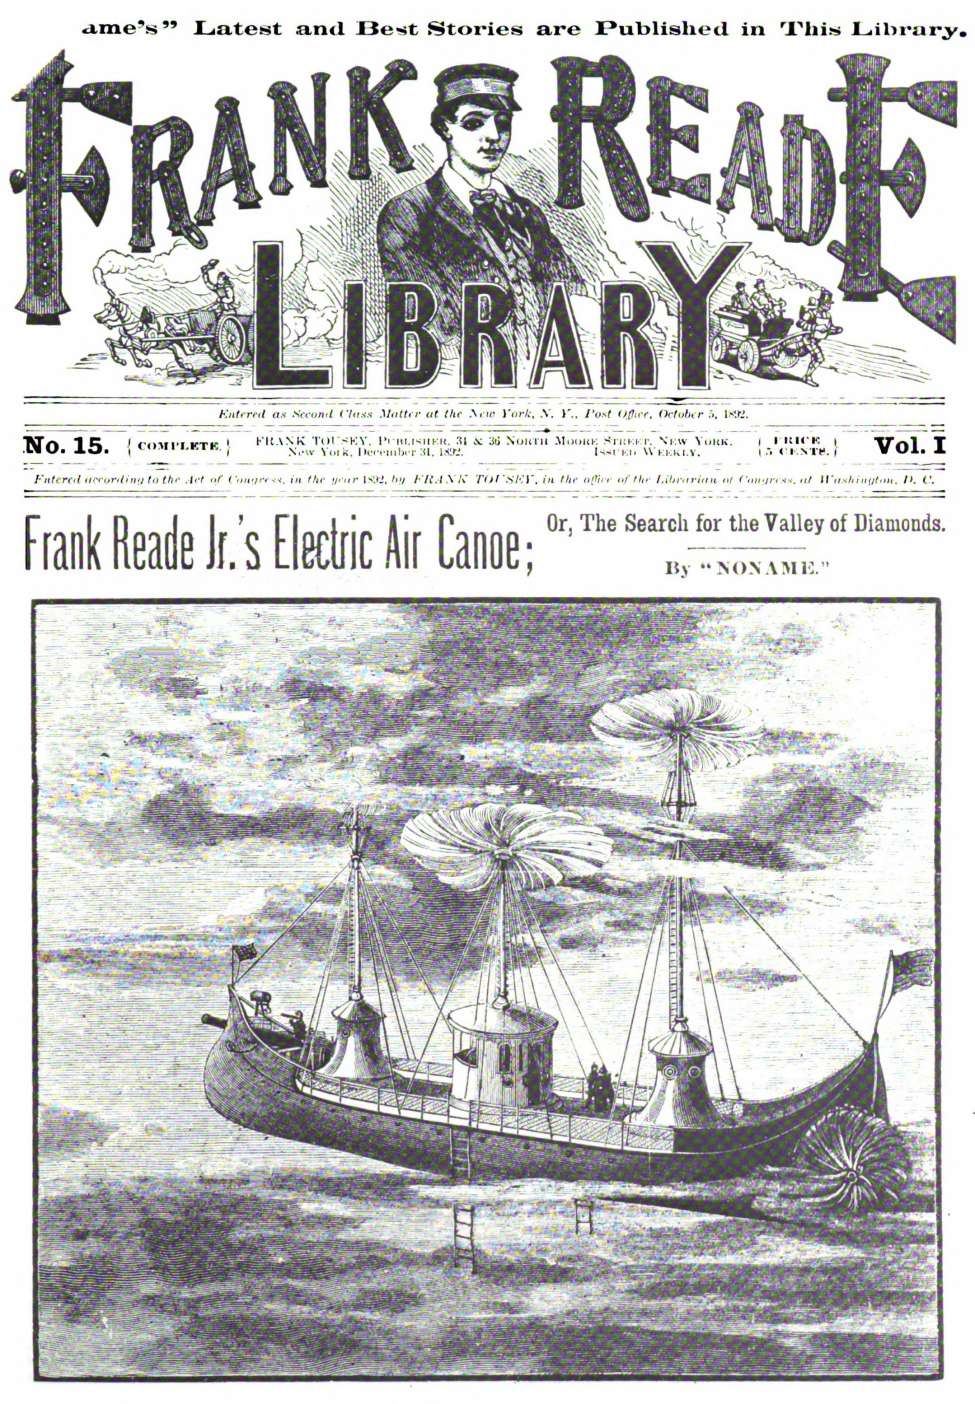 Book Cover For v01 15 - Frank Reade's Electric Air Canoe